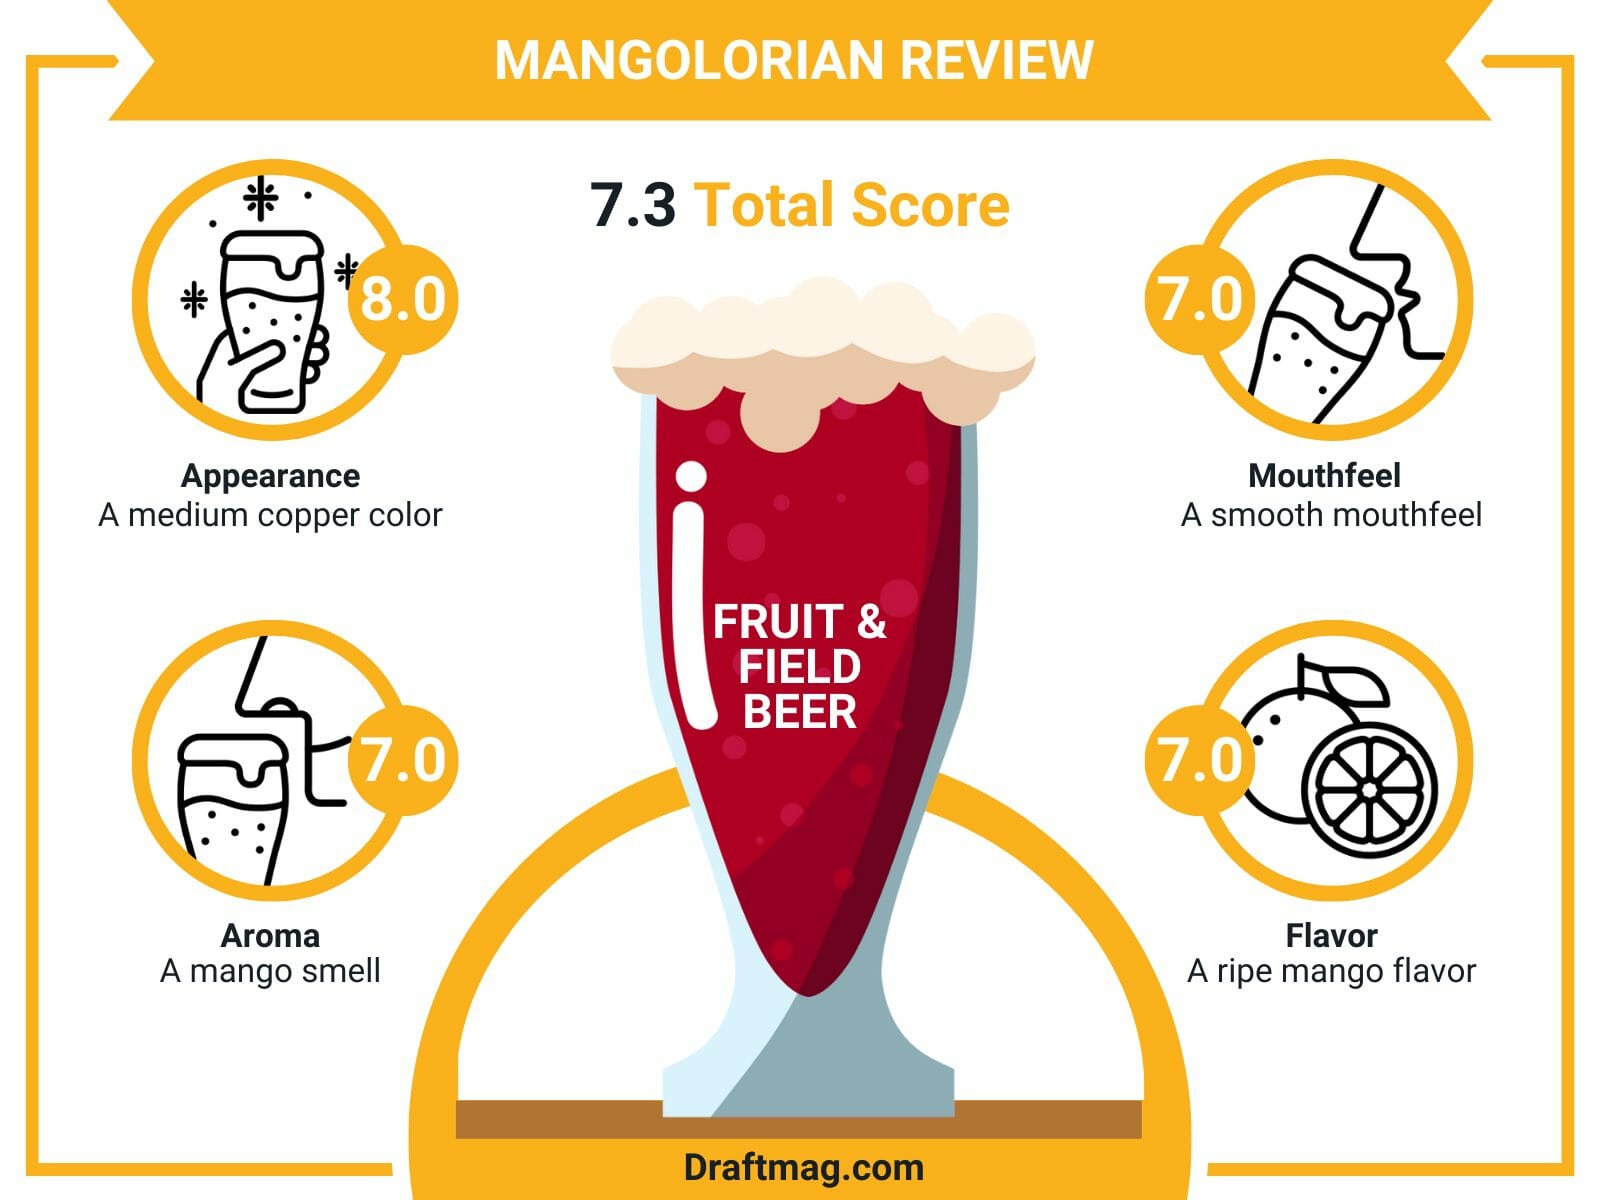 Mangolorian review infographic